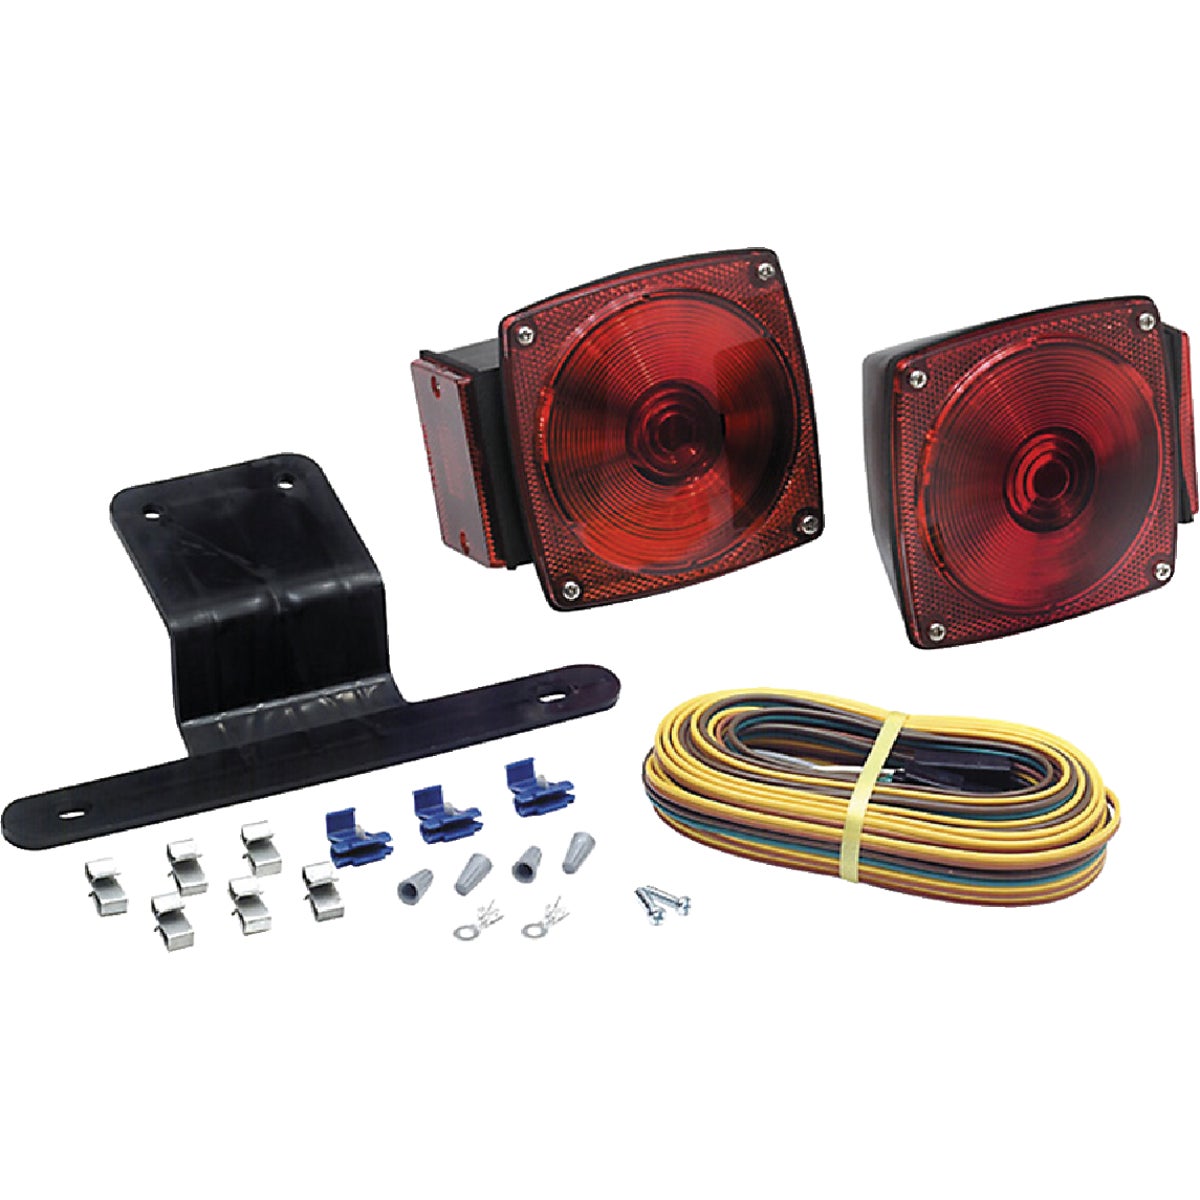 Item 573347, Contains two tail lights with red side marker/reflectors, license bracket, 